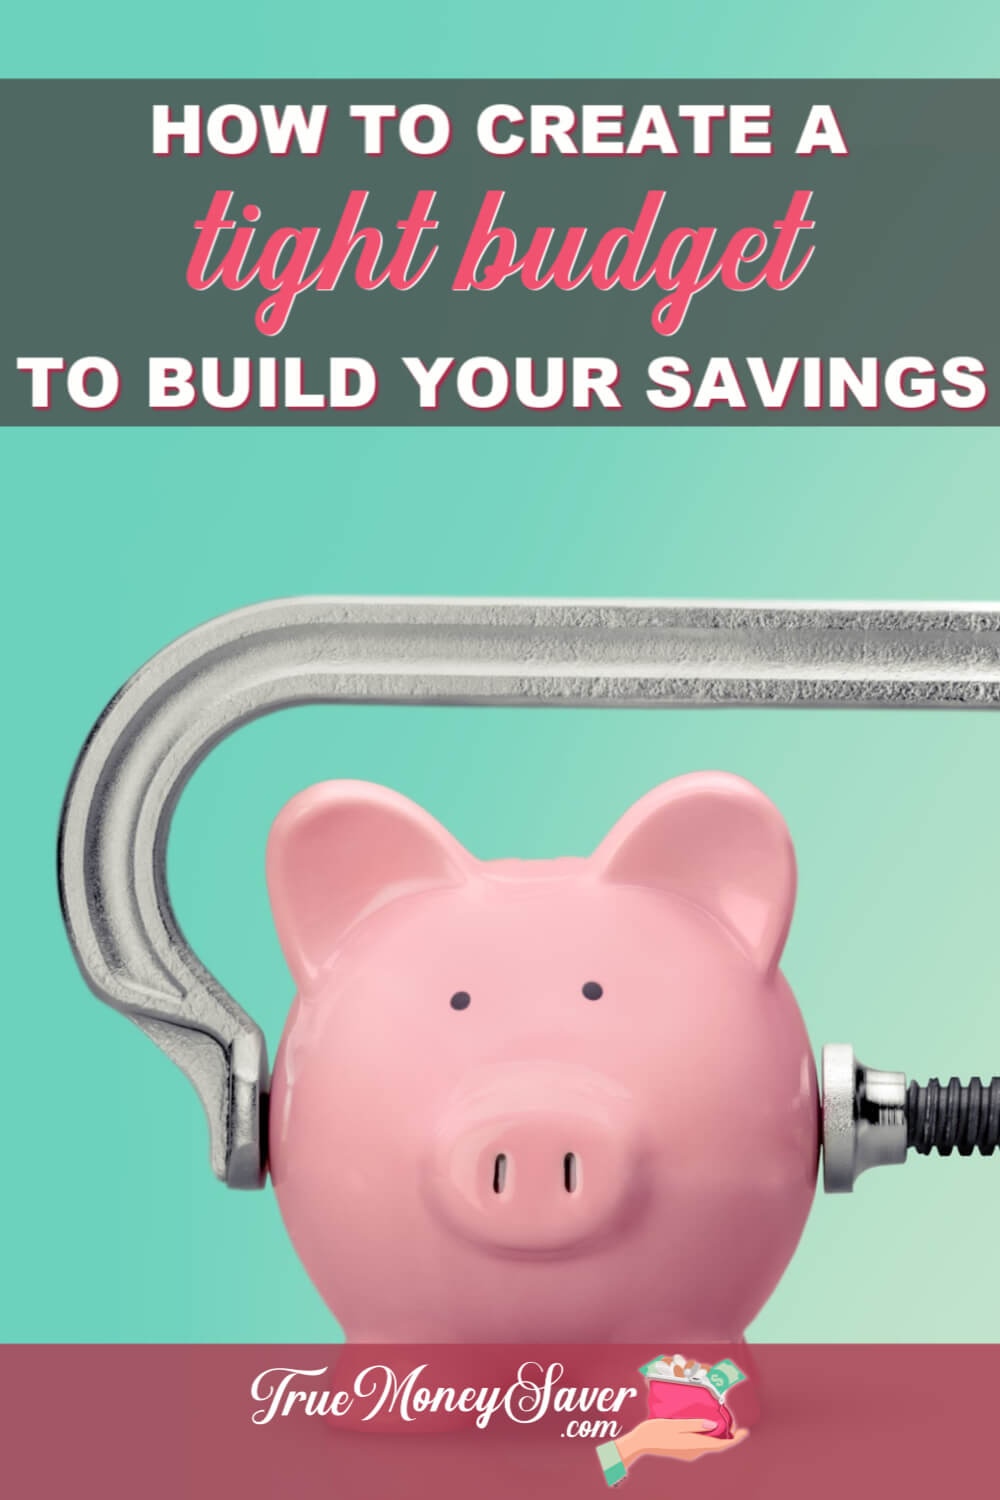 How To Create A Tight Budget To Build Your Savings